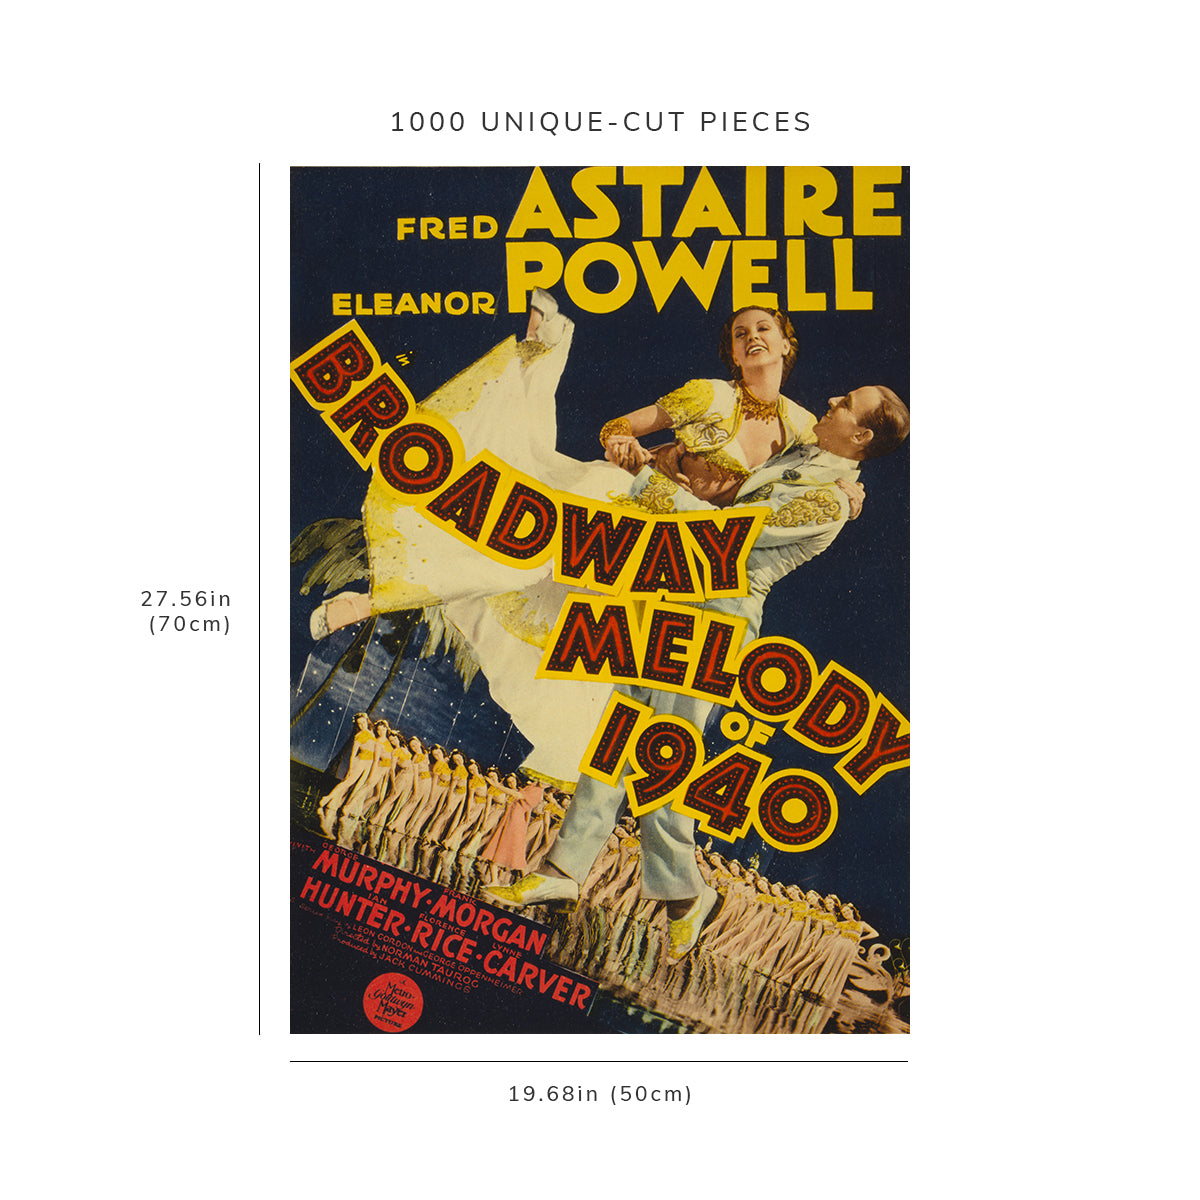 1000 piece puzzle - 1940 Photo: Broadway melody | Fred Astaire | Eleanor Powell | Birthday Present Gifts